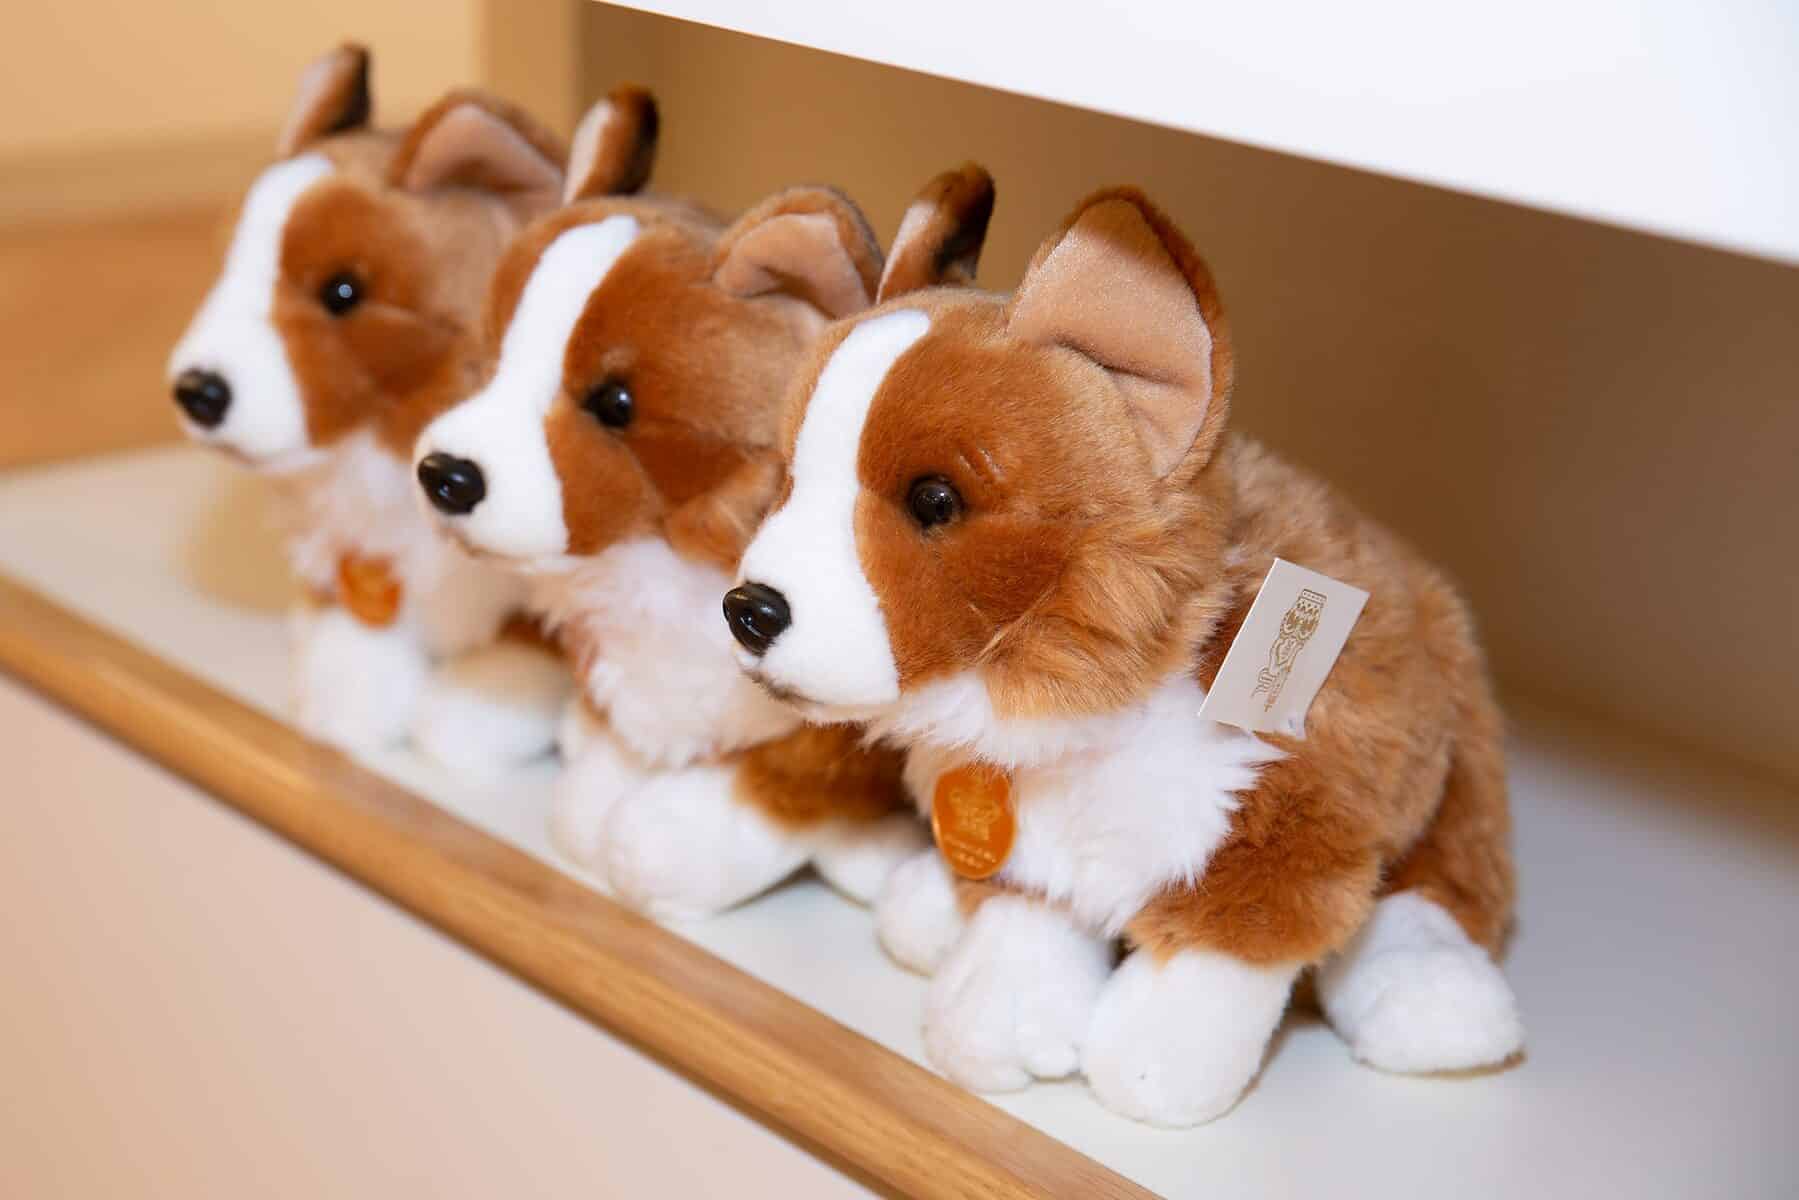 A Stuffed Corgi from the Royal Collection Shop